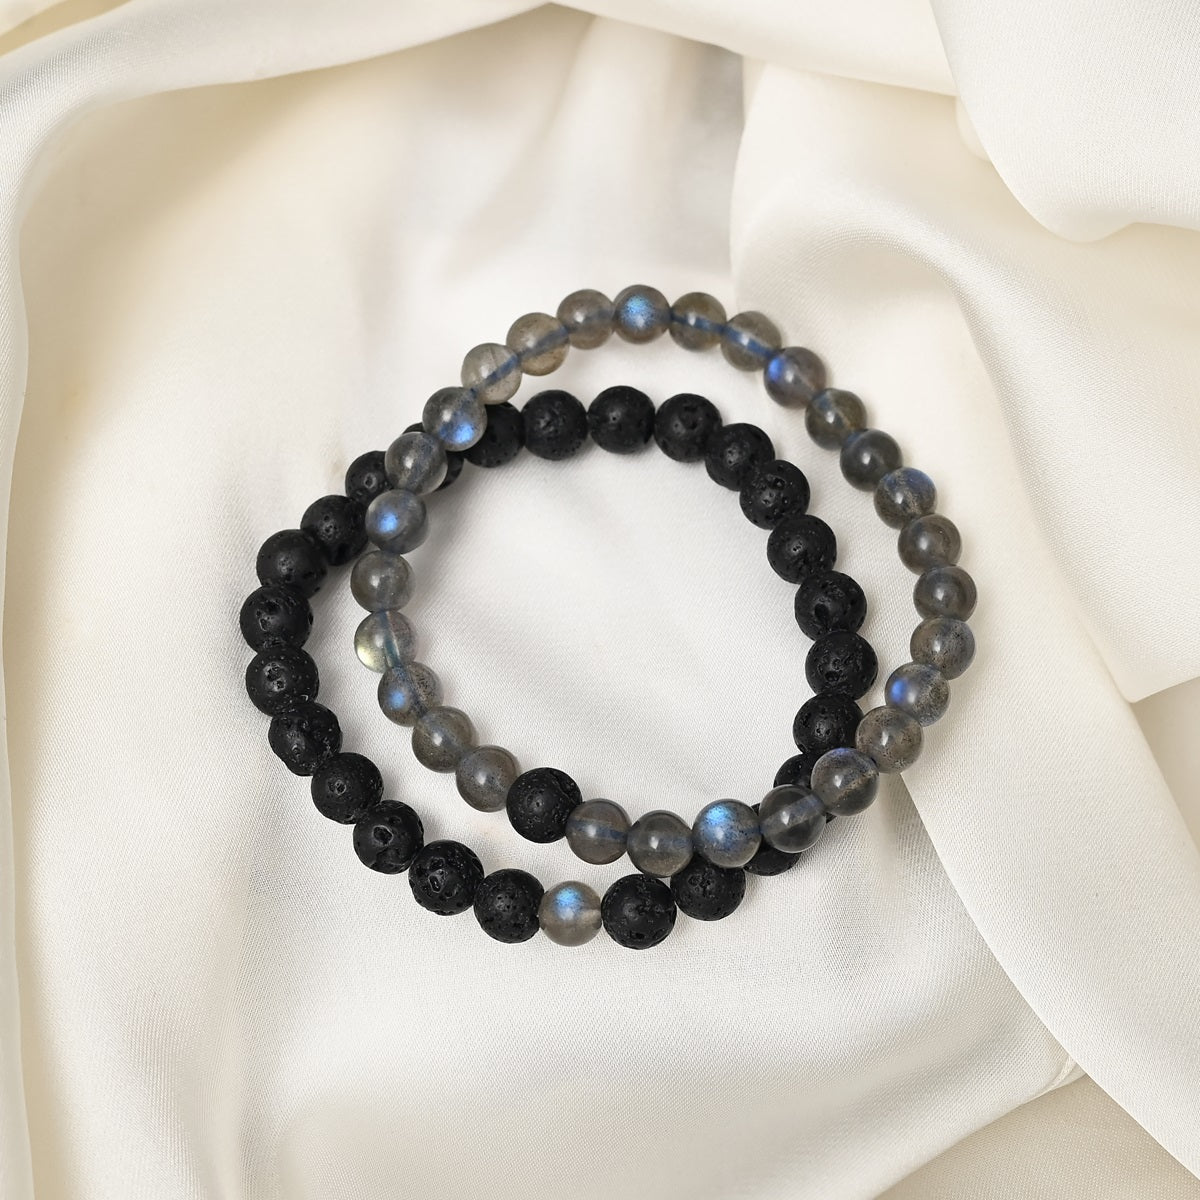 Detailed close-up showcasing the intricate beauty of gray Labradorite and black Lava gemstones in our exquisite bracelet